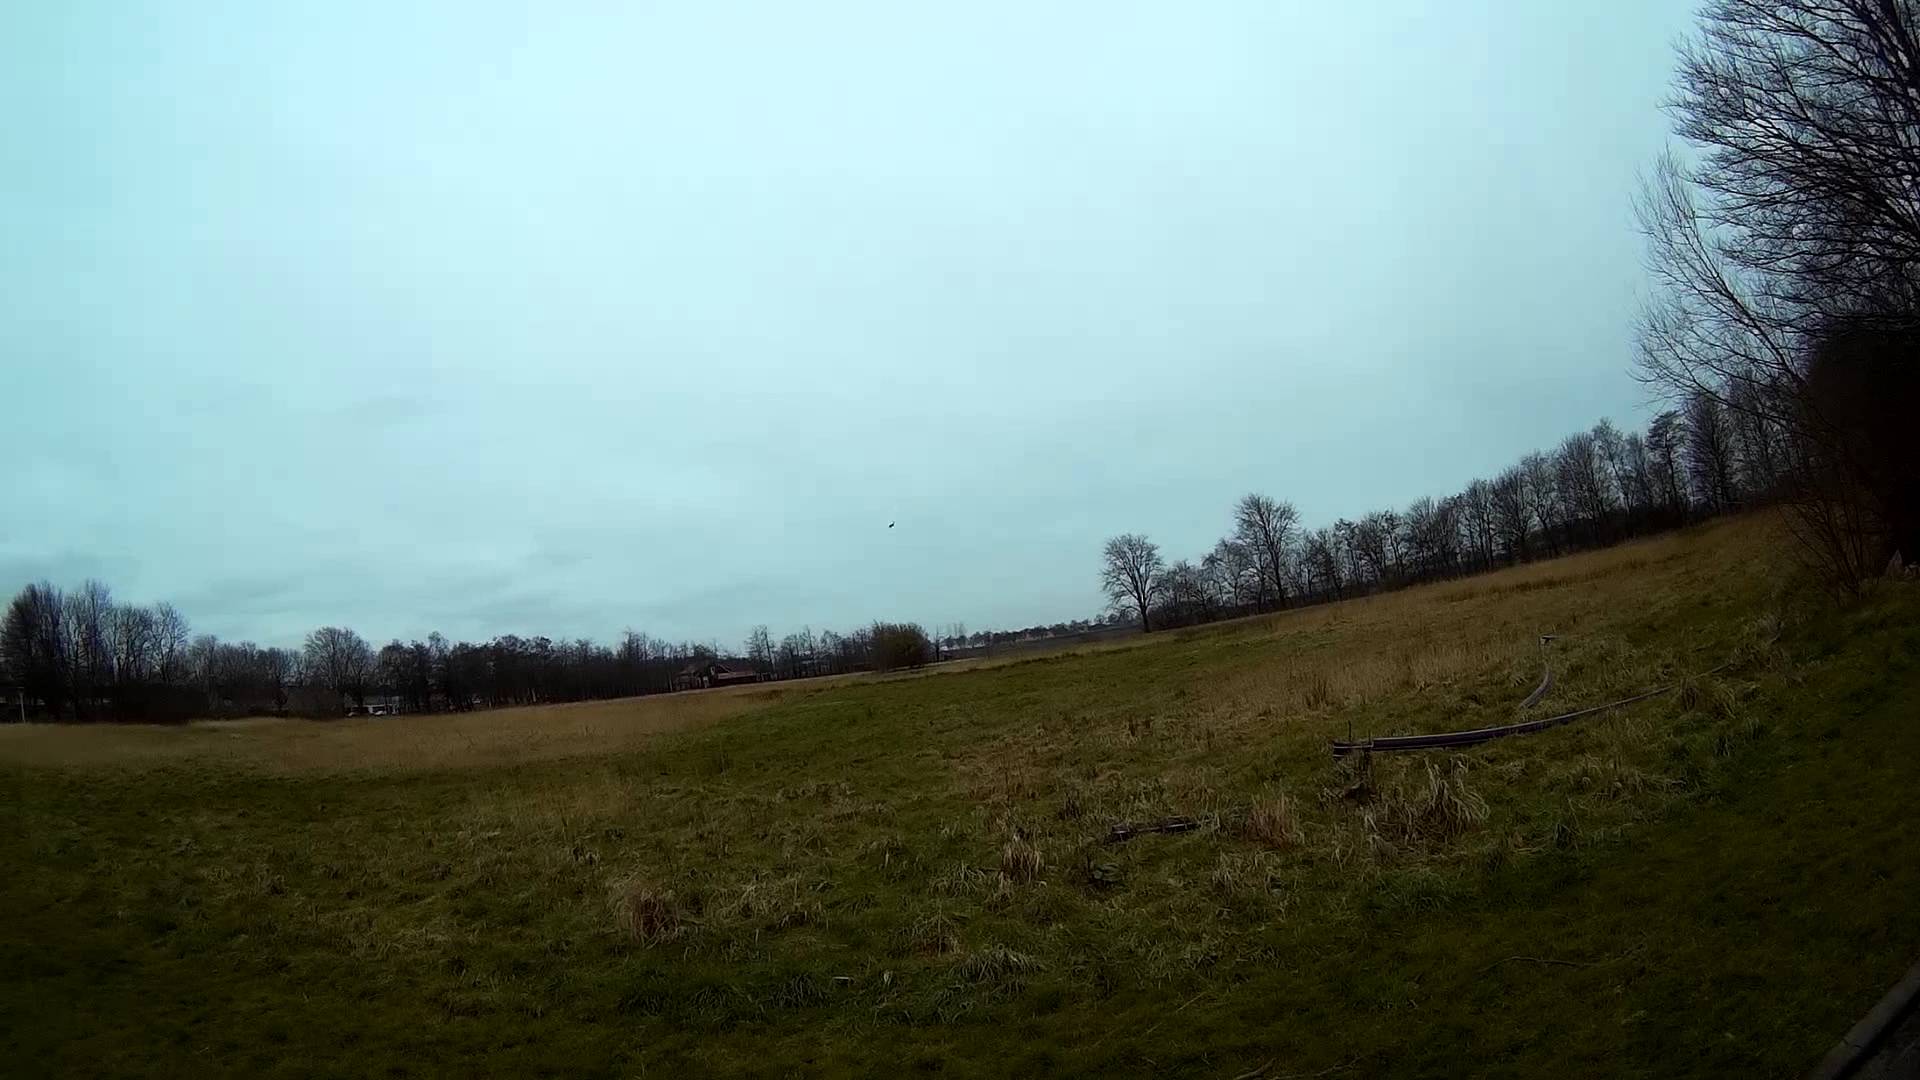 My first outdoor flight with the Eachine Assassin 180 quadcopter